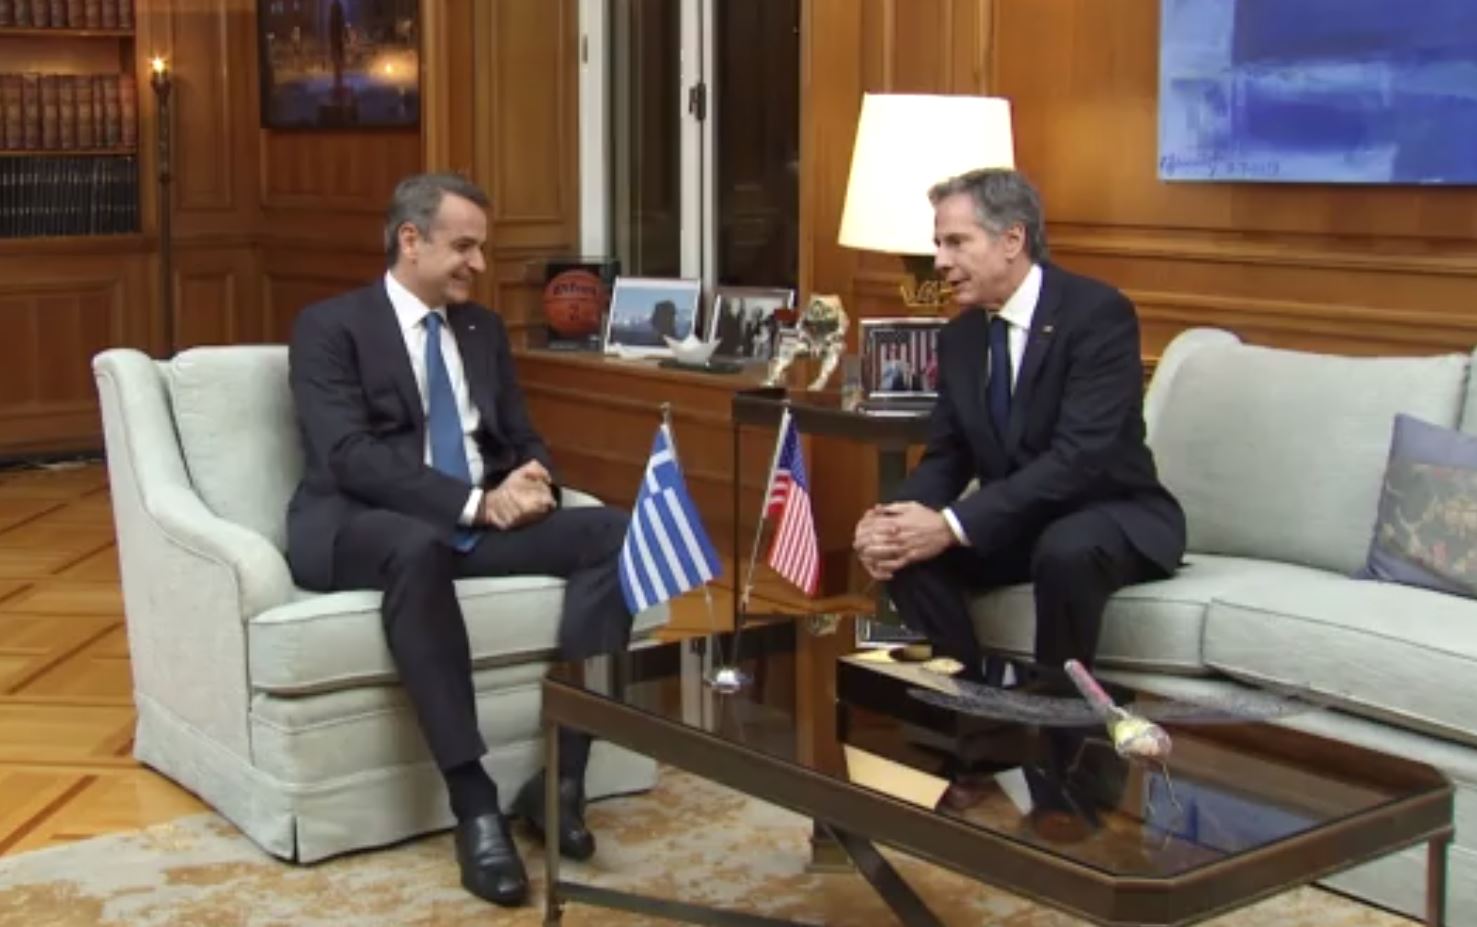 Mitsotakis to Blinken: Every form of revisionism must be opposed by int’l community of democracies